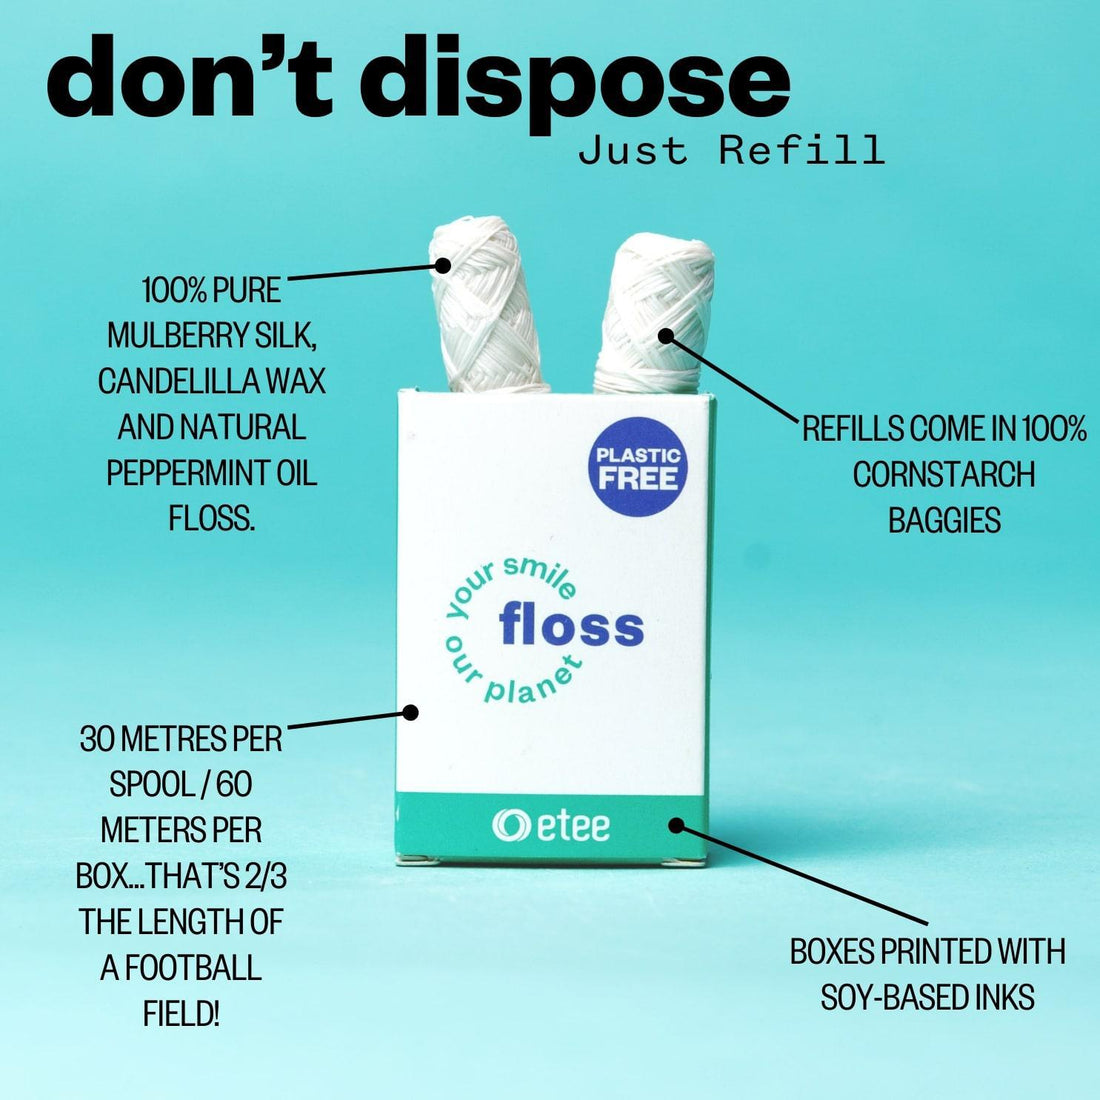 Infographic of etee's dental floss with heading "don't dispose, just refill". Text reads "100% pure mulberry silk candelilla wax and natural peppermint oil floss, 30m per spool and 60m per box, refills come in 100% cornstarch baggies, and boxes printed with soy-based inks"